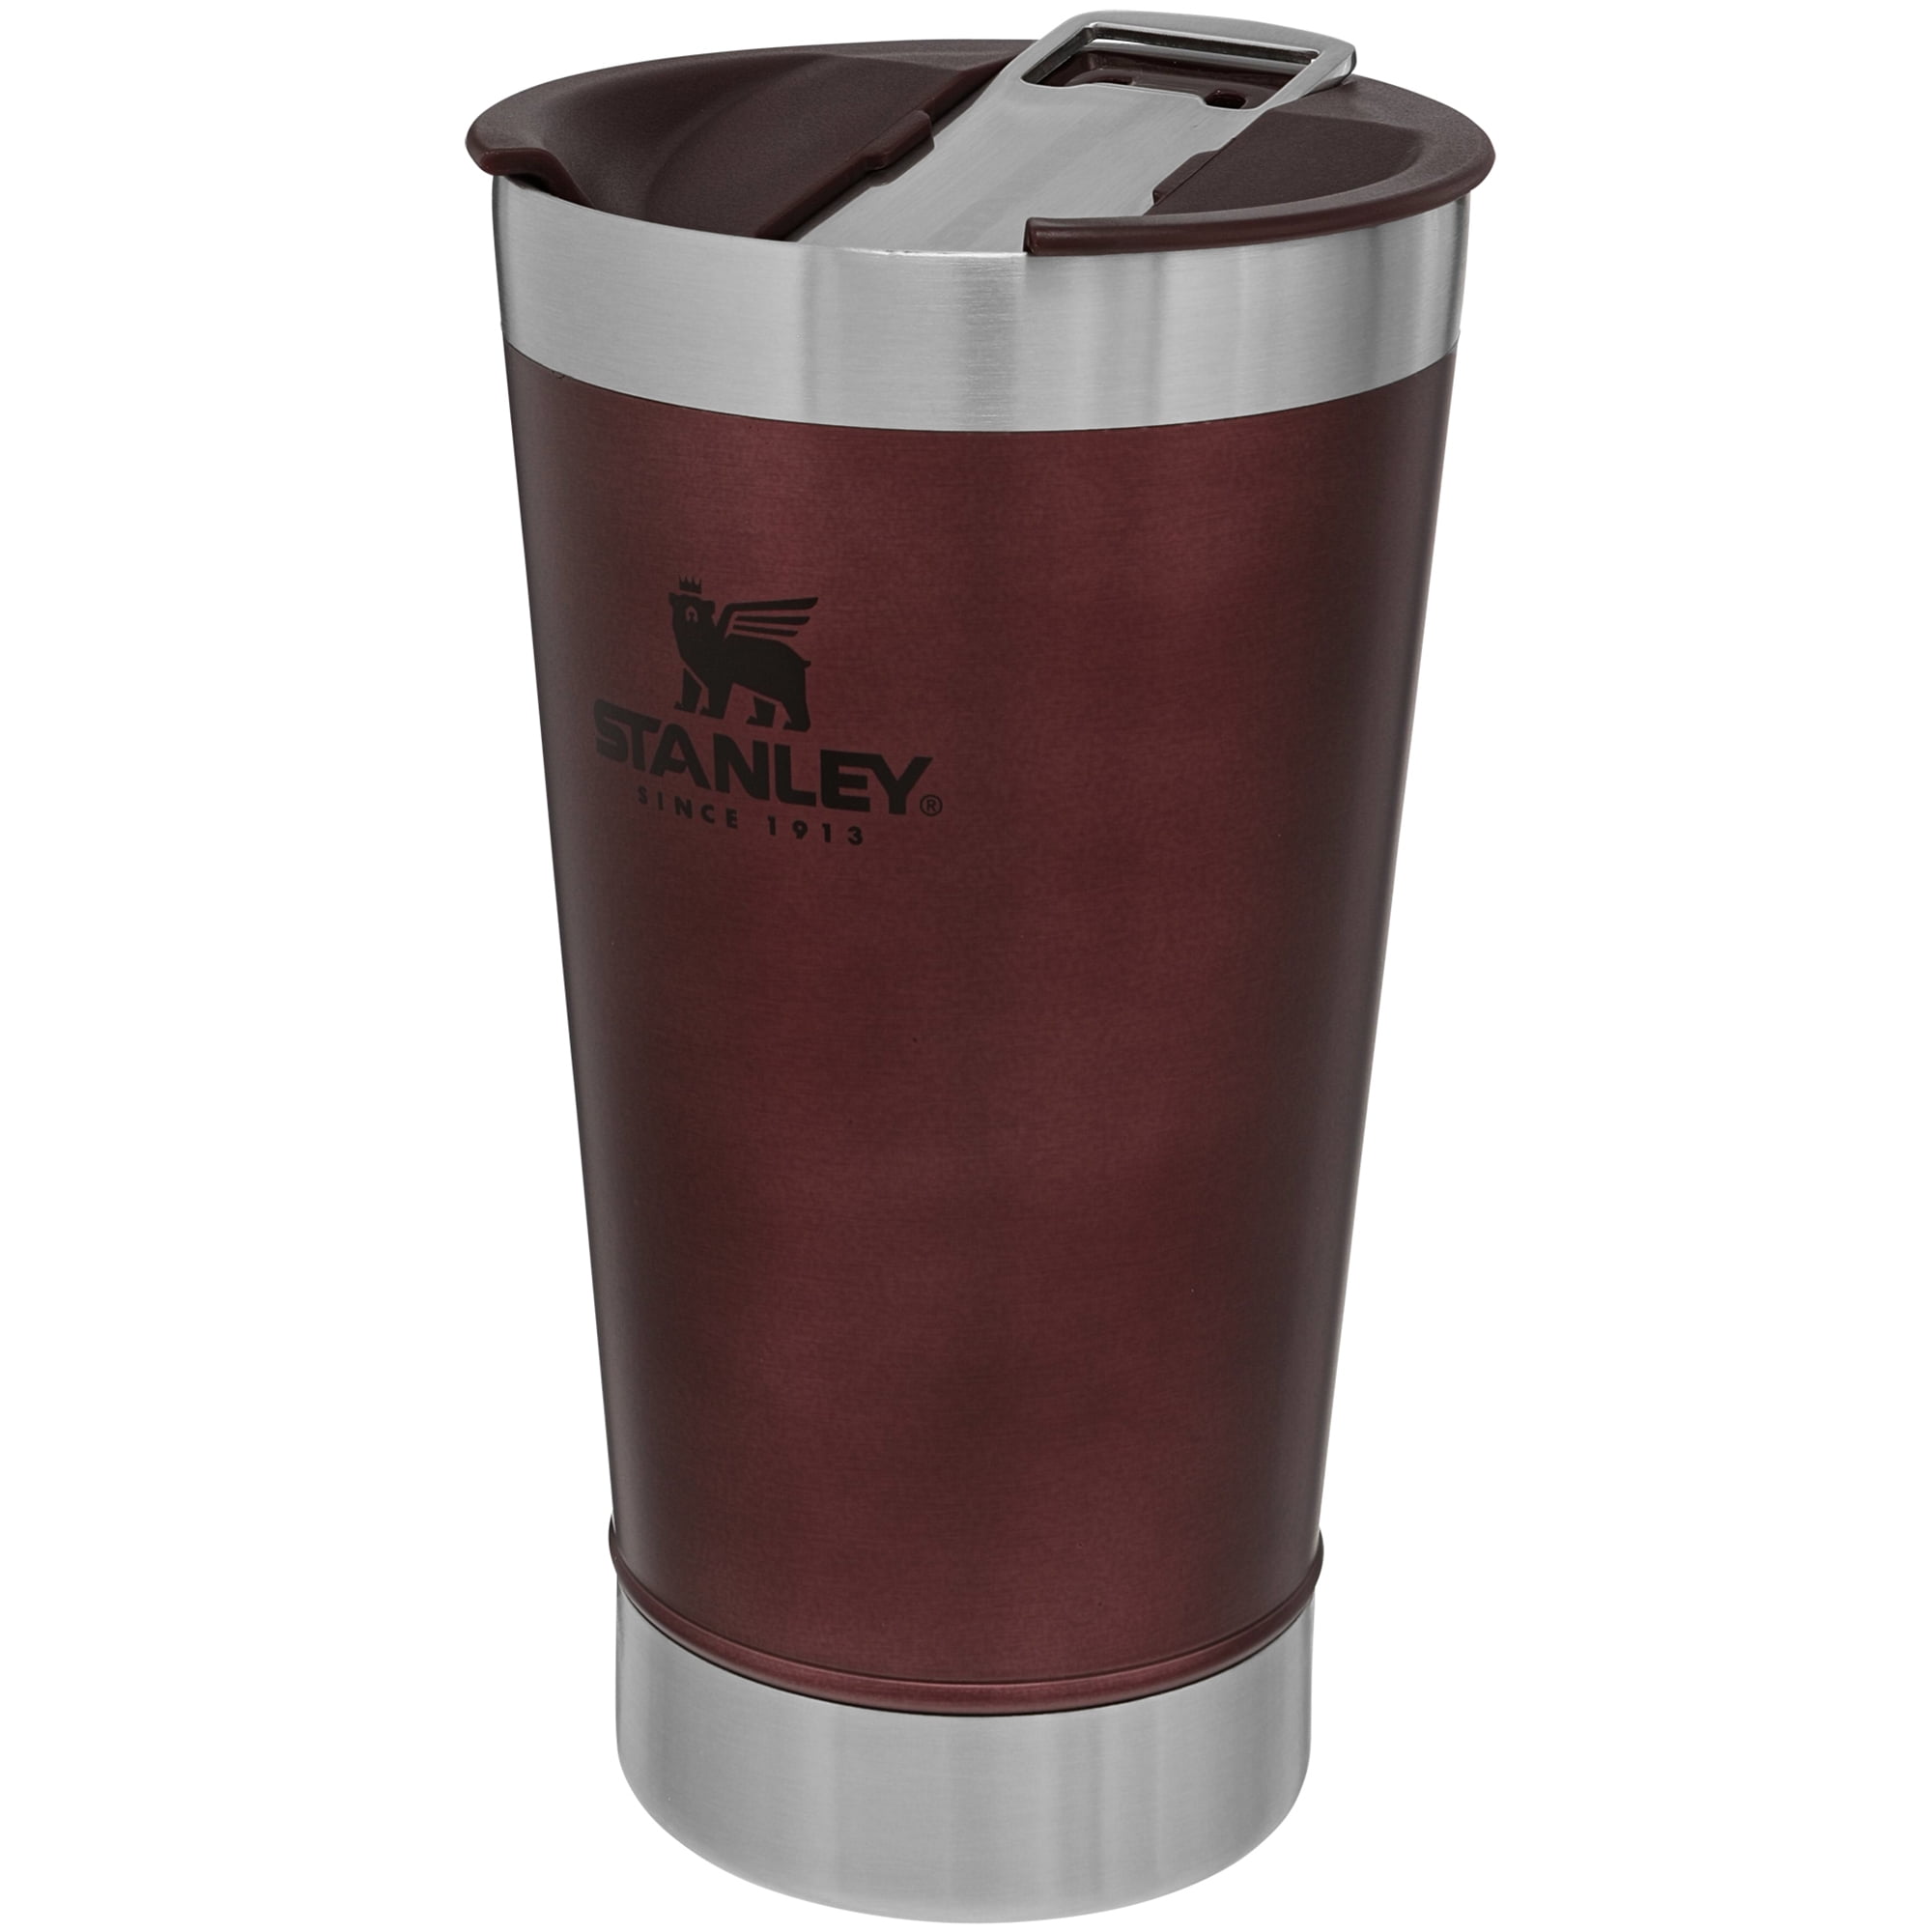 Stanley Classic Stay Chill Vacuum Insulated Pint Glass with Lid